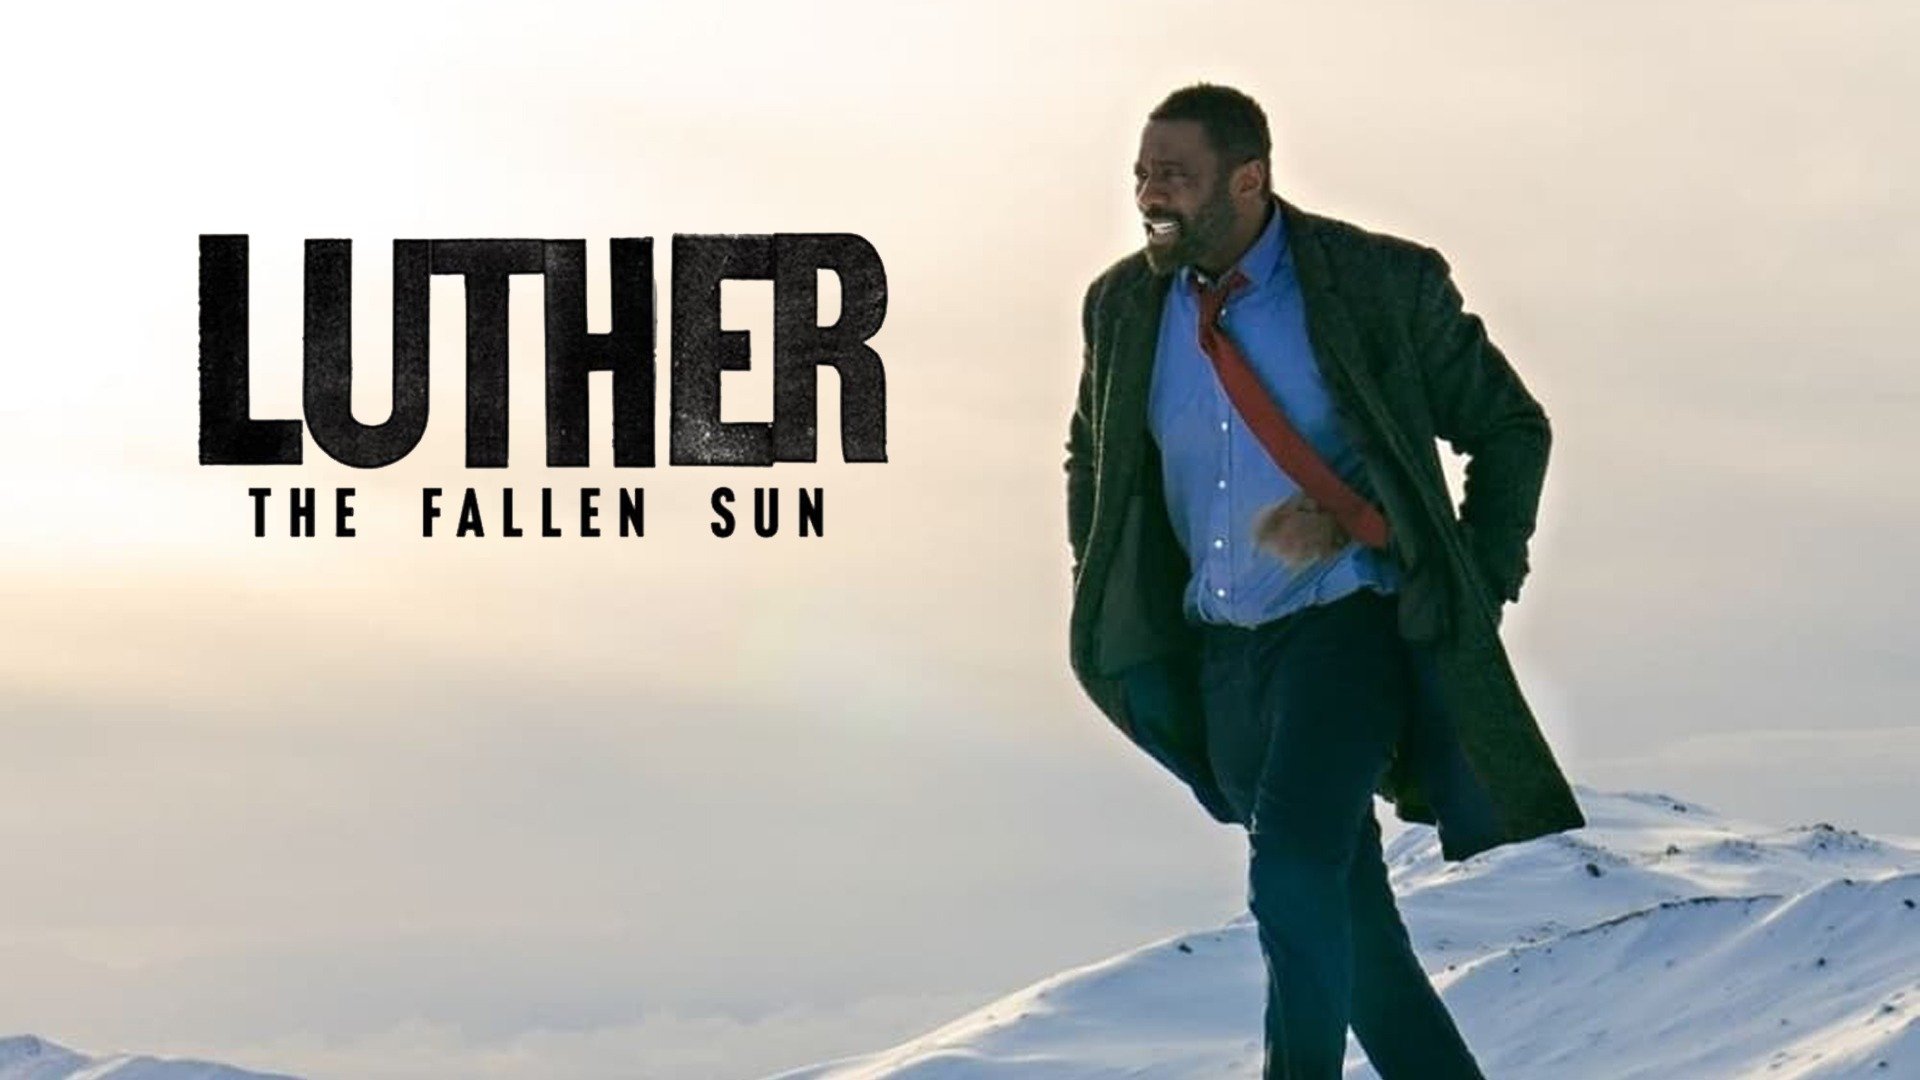 Where is Luther streaming in 2021? Where to watch Luther